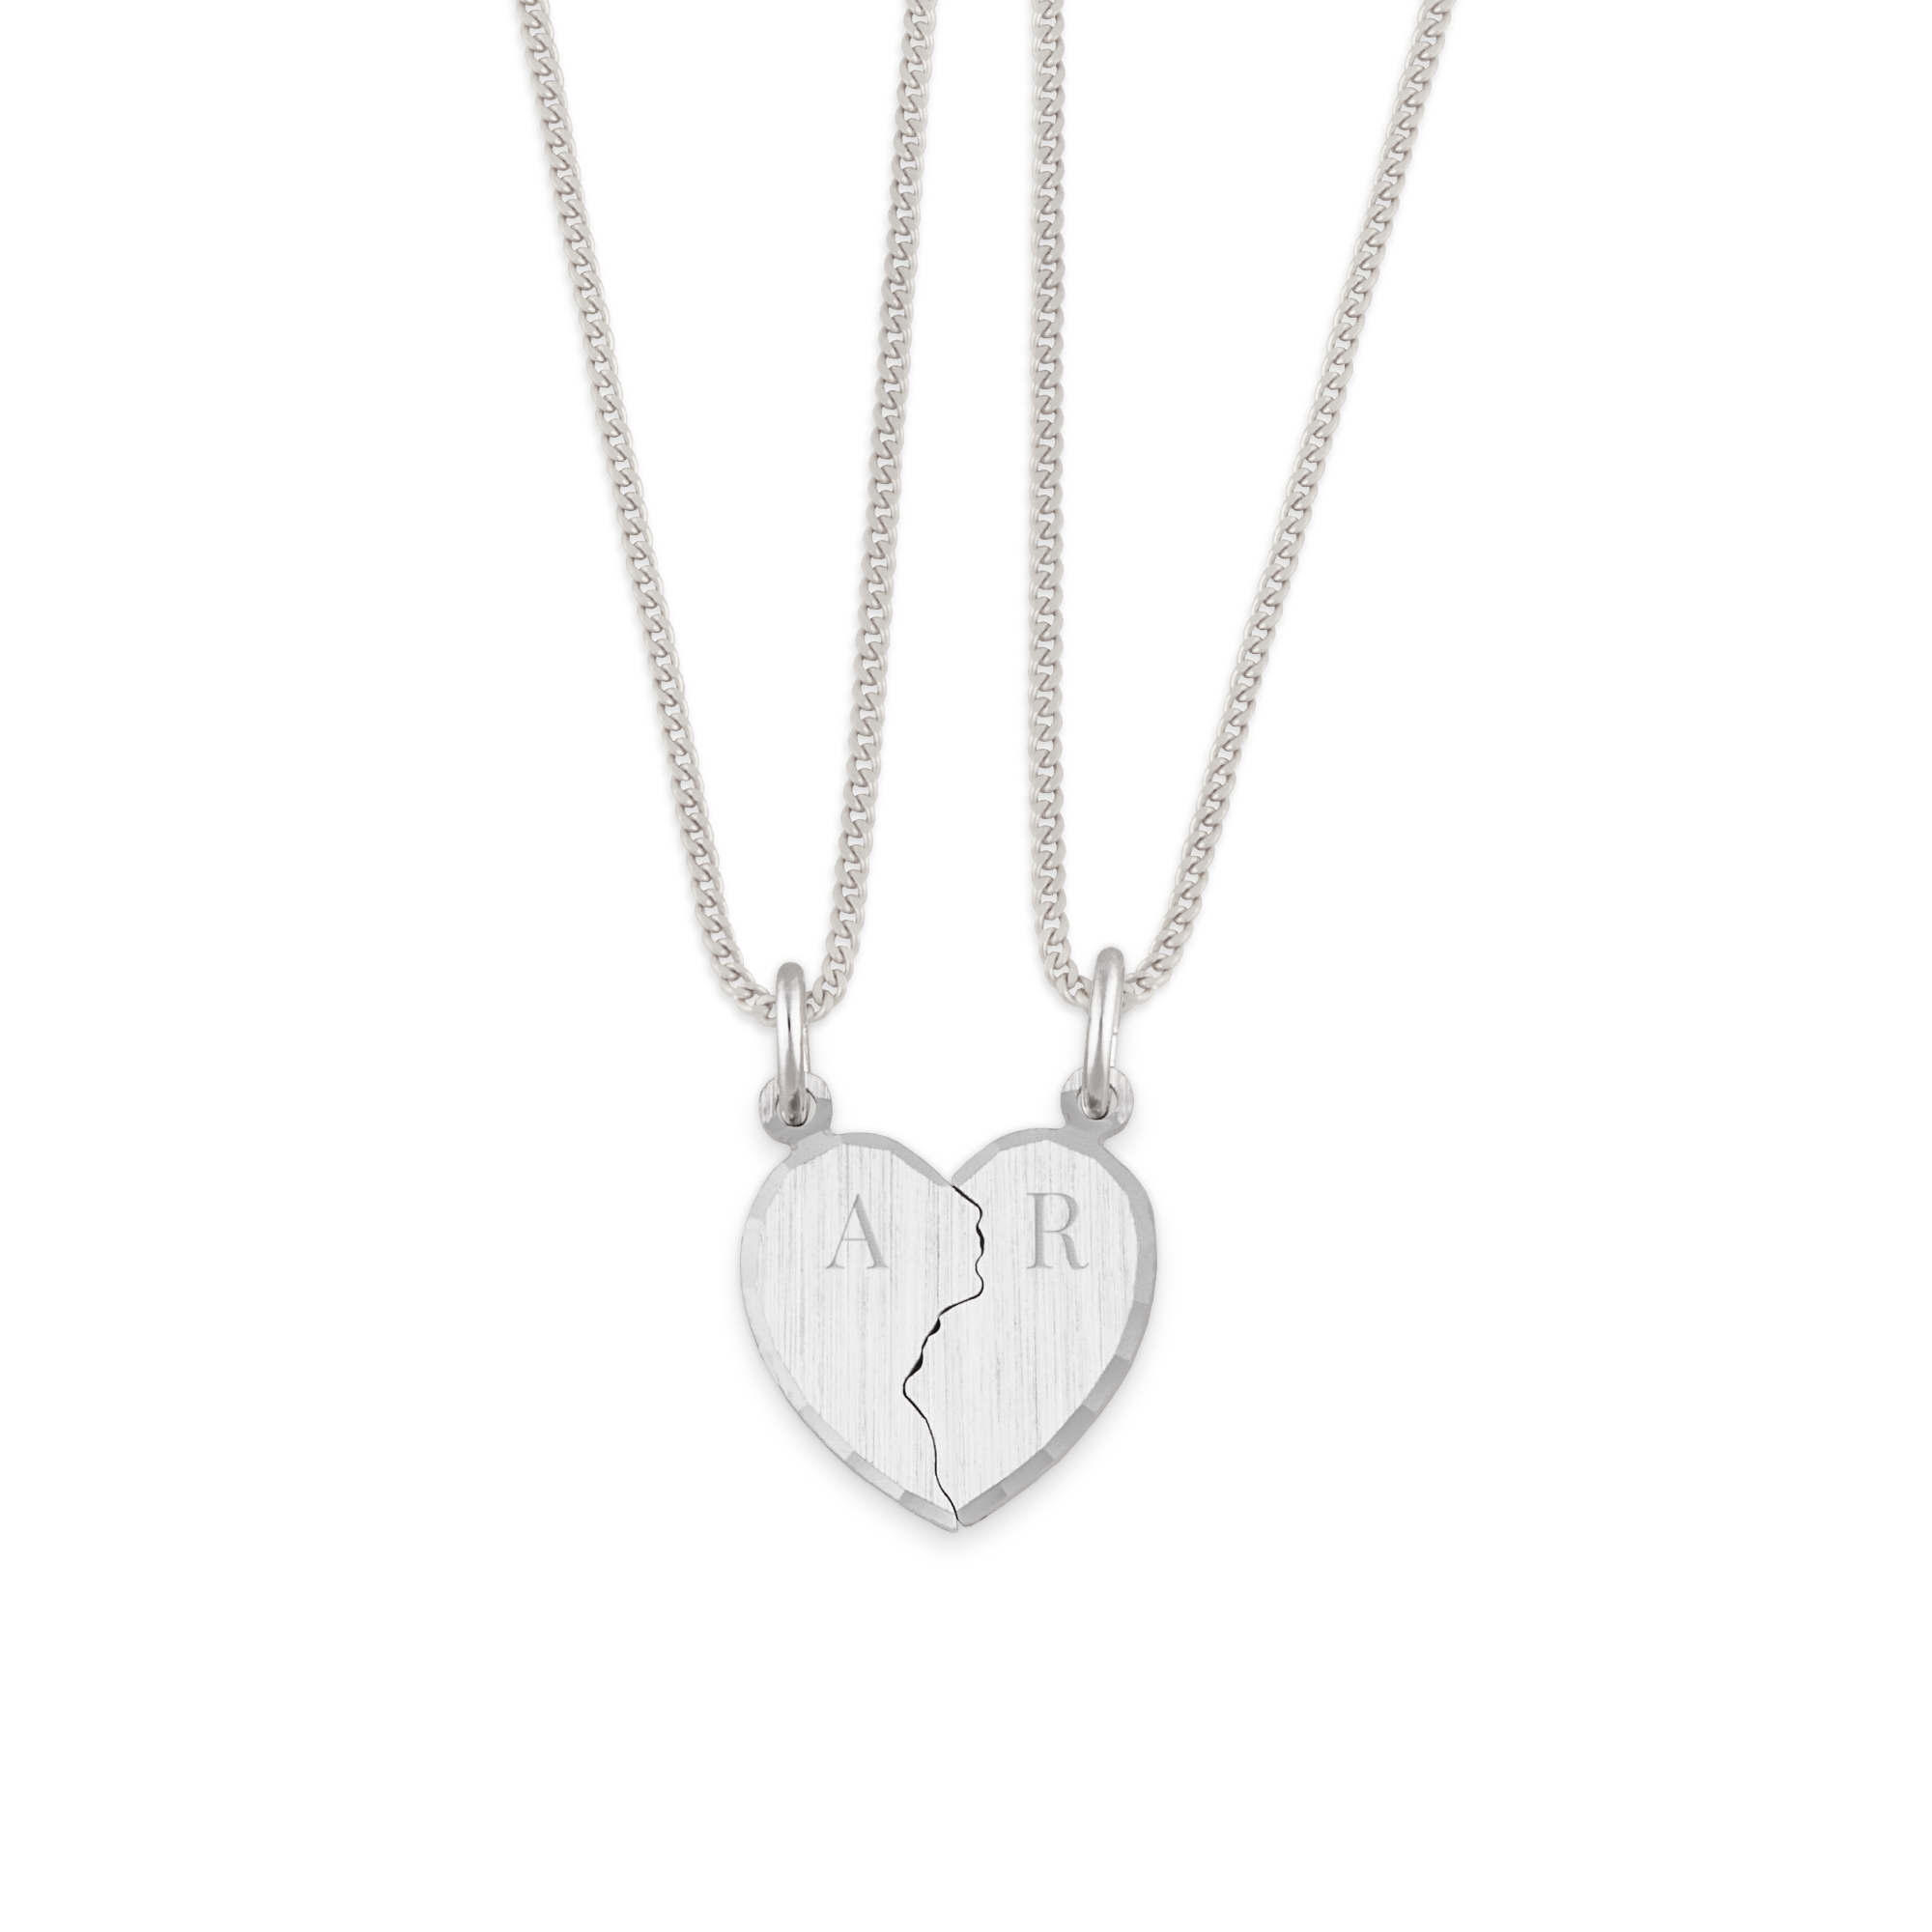 Personalized Engraved Stainless Steel Broken Heart Necklace Engraved 2  Pieces Split Heart Necklaces Boys & Girls Birthday Gift - AliExpress